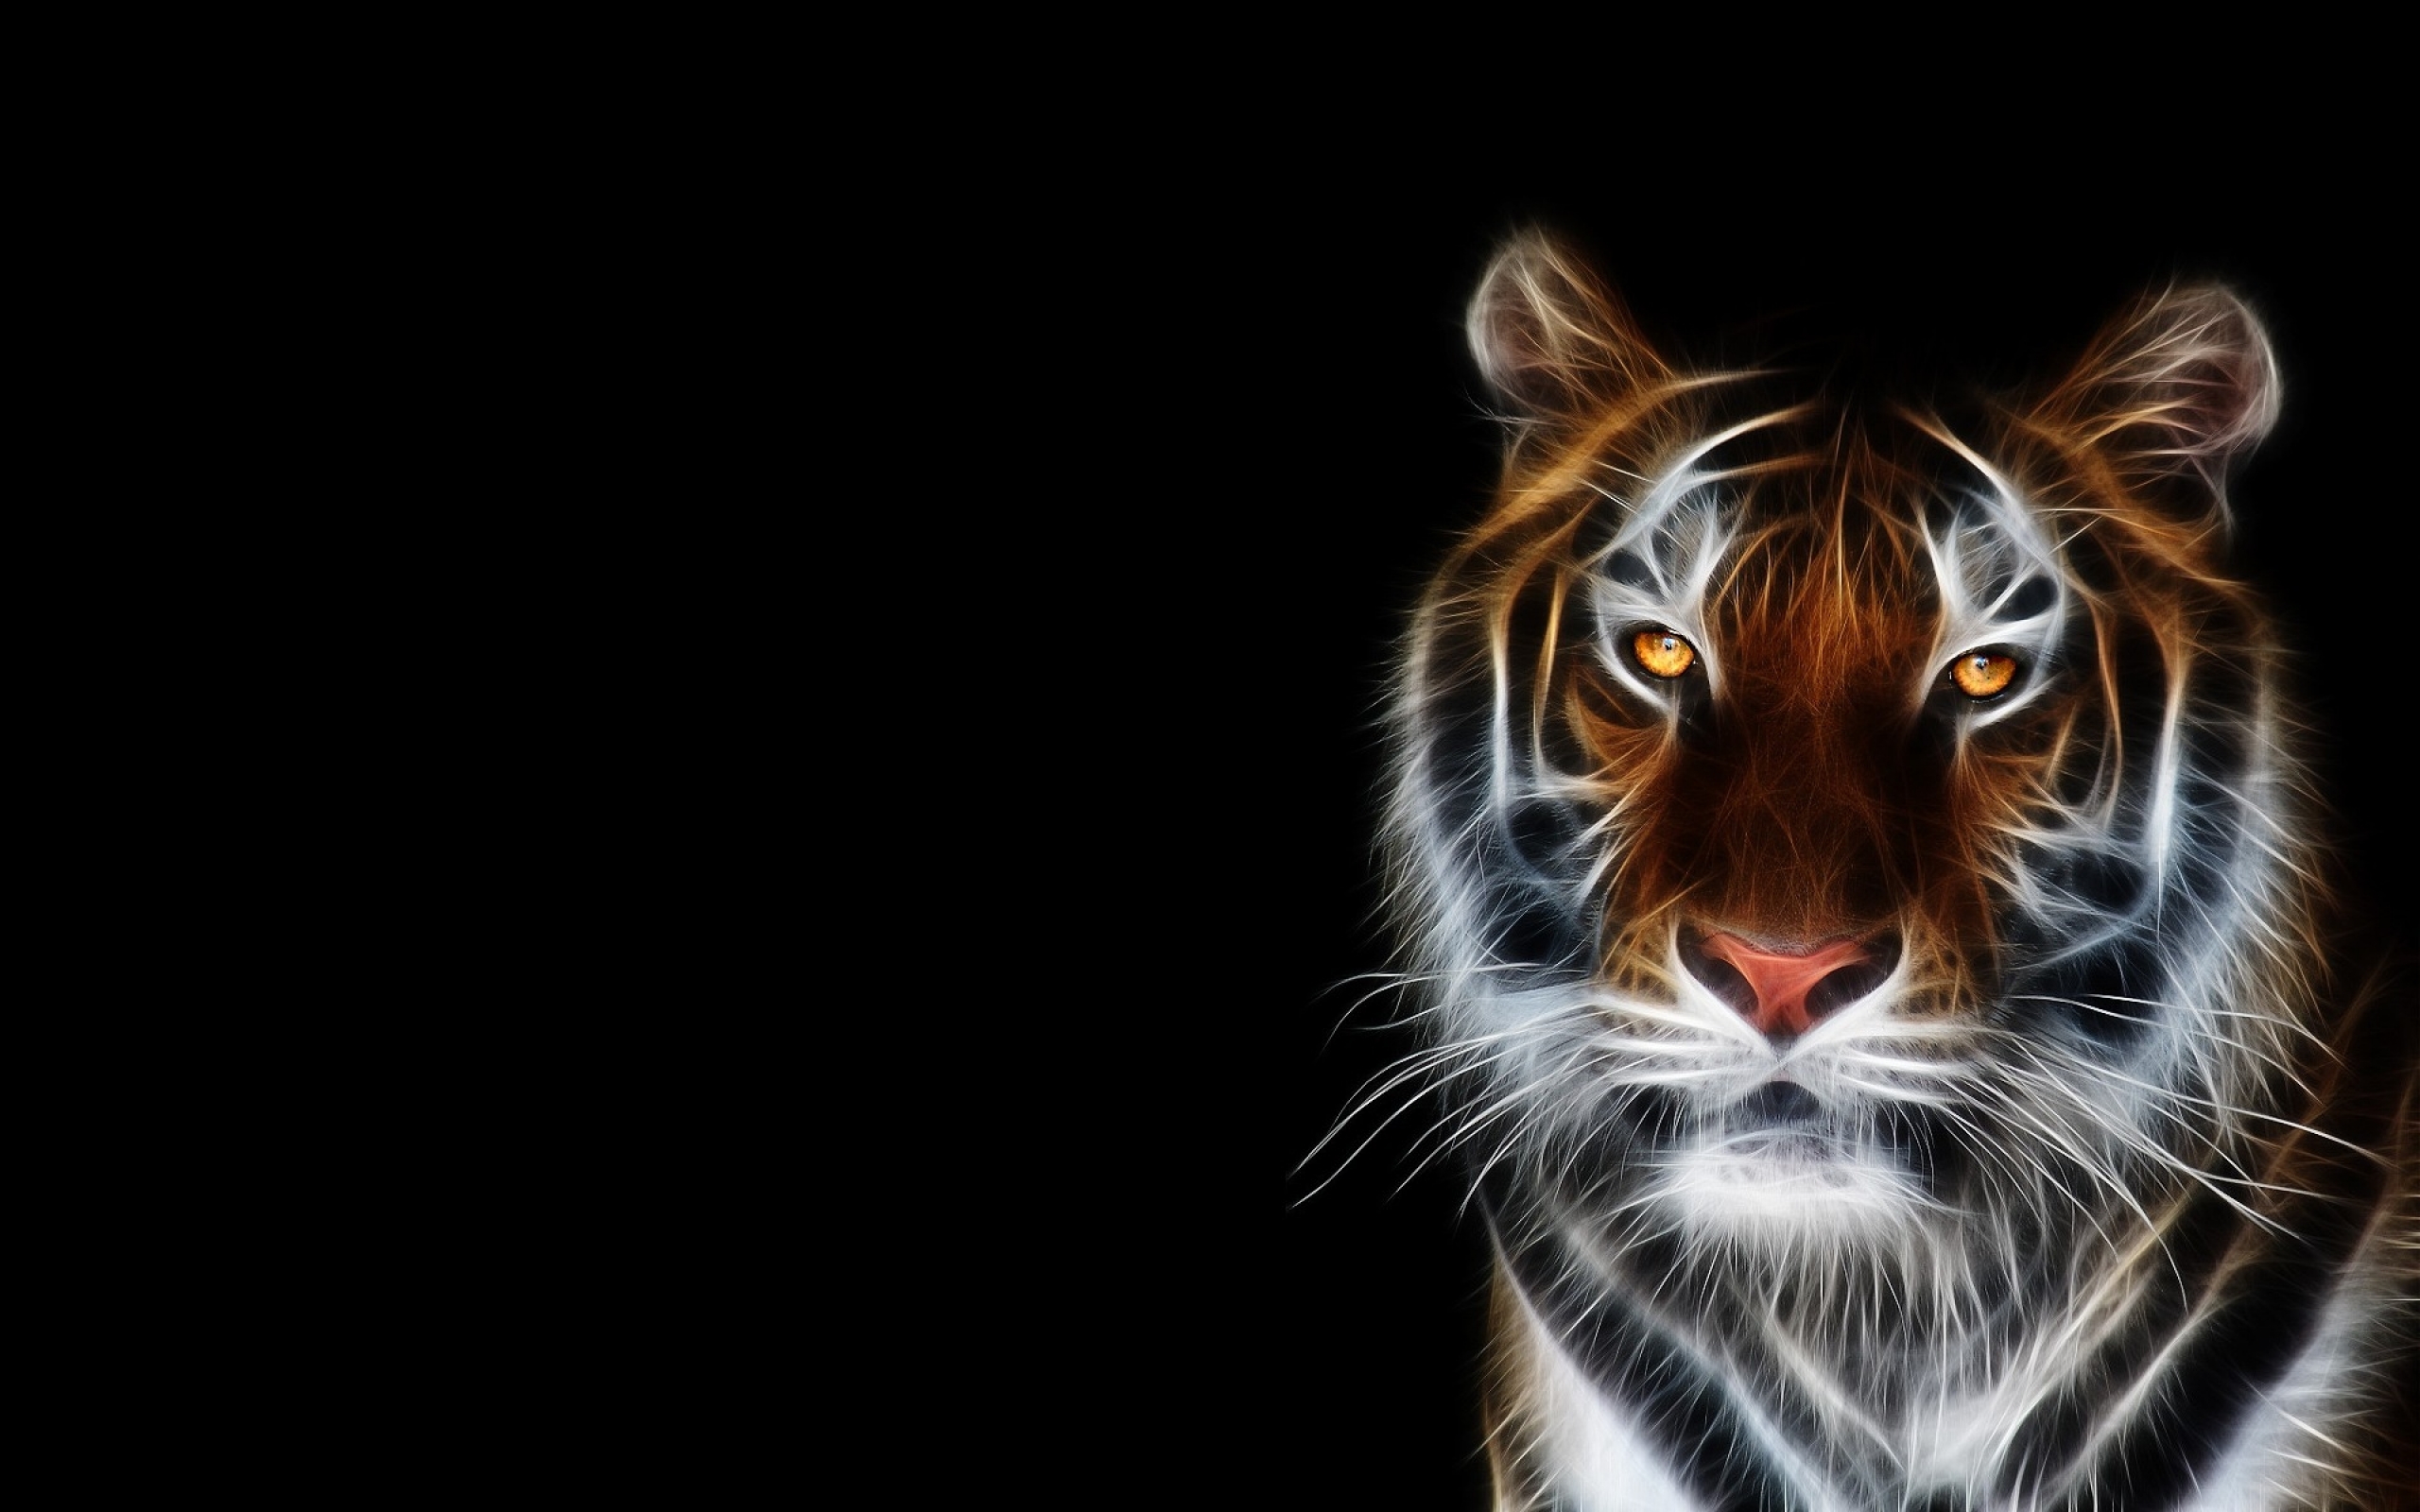 Background Tiger Images Hd - HD Wallpaper 